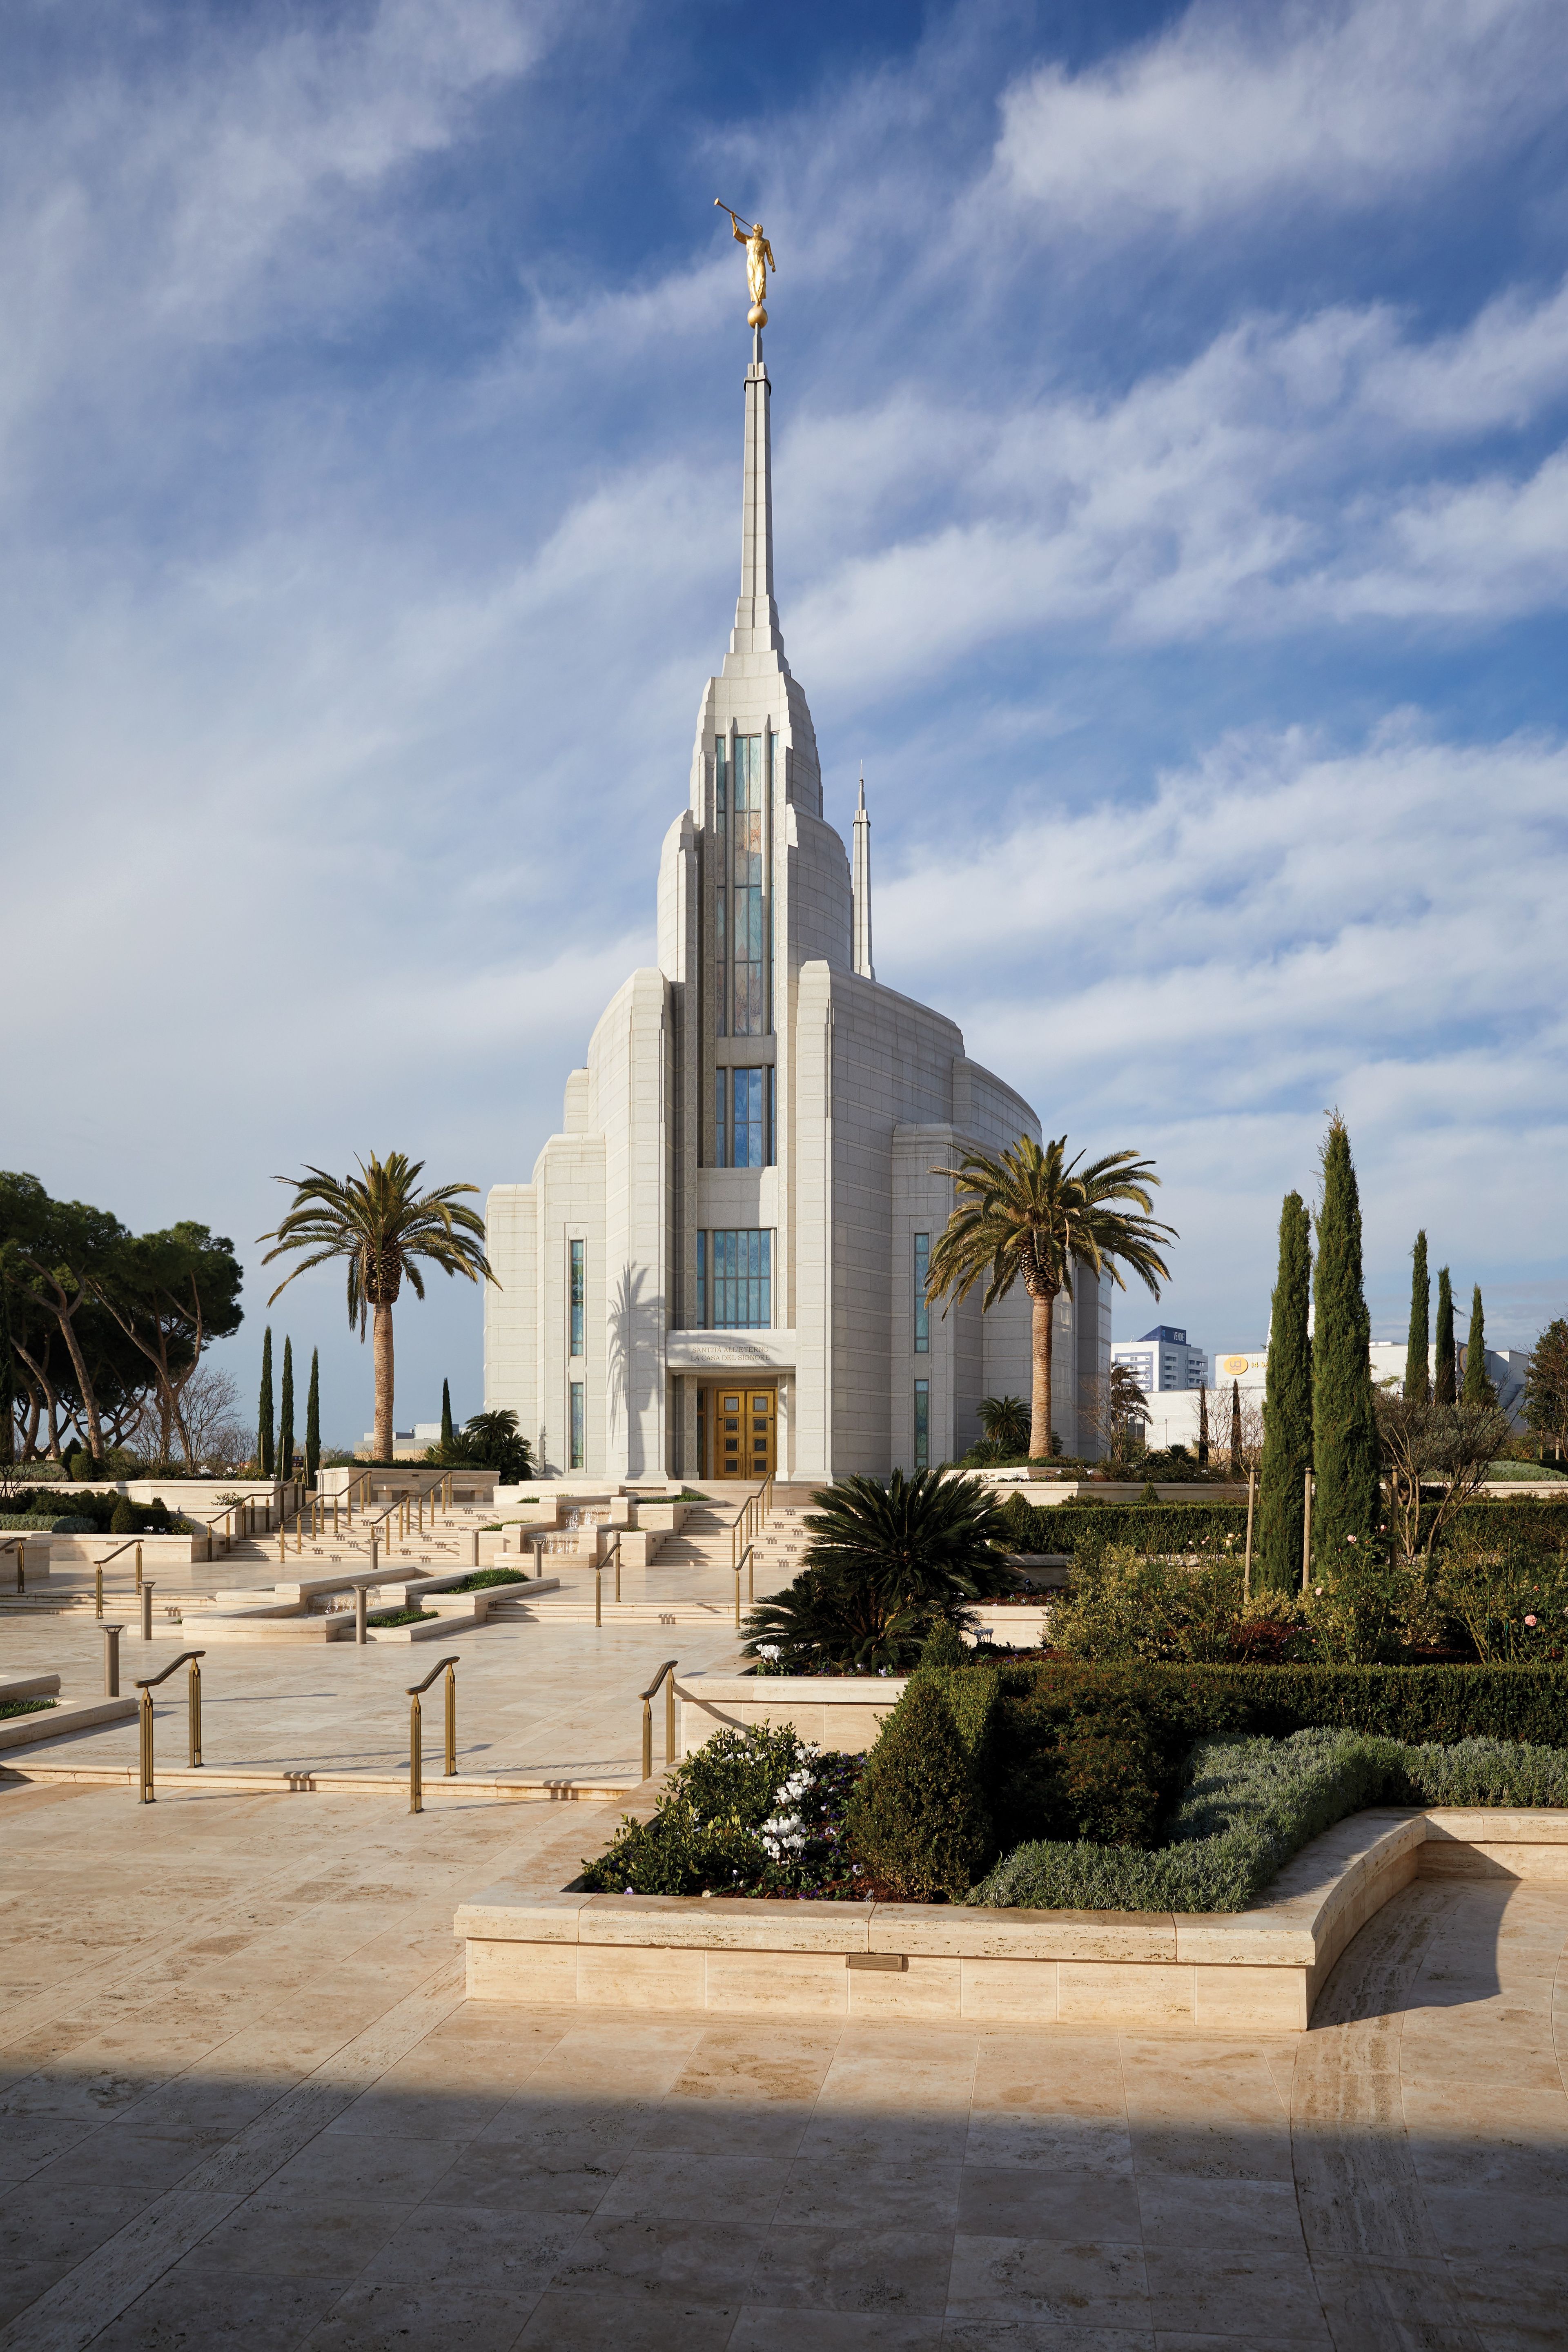 The Rome Italy Temple grounds during the day.